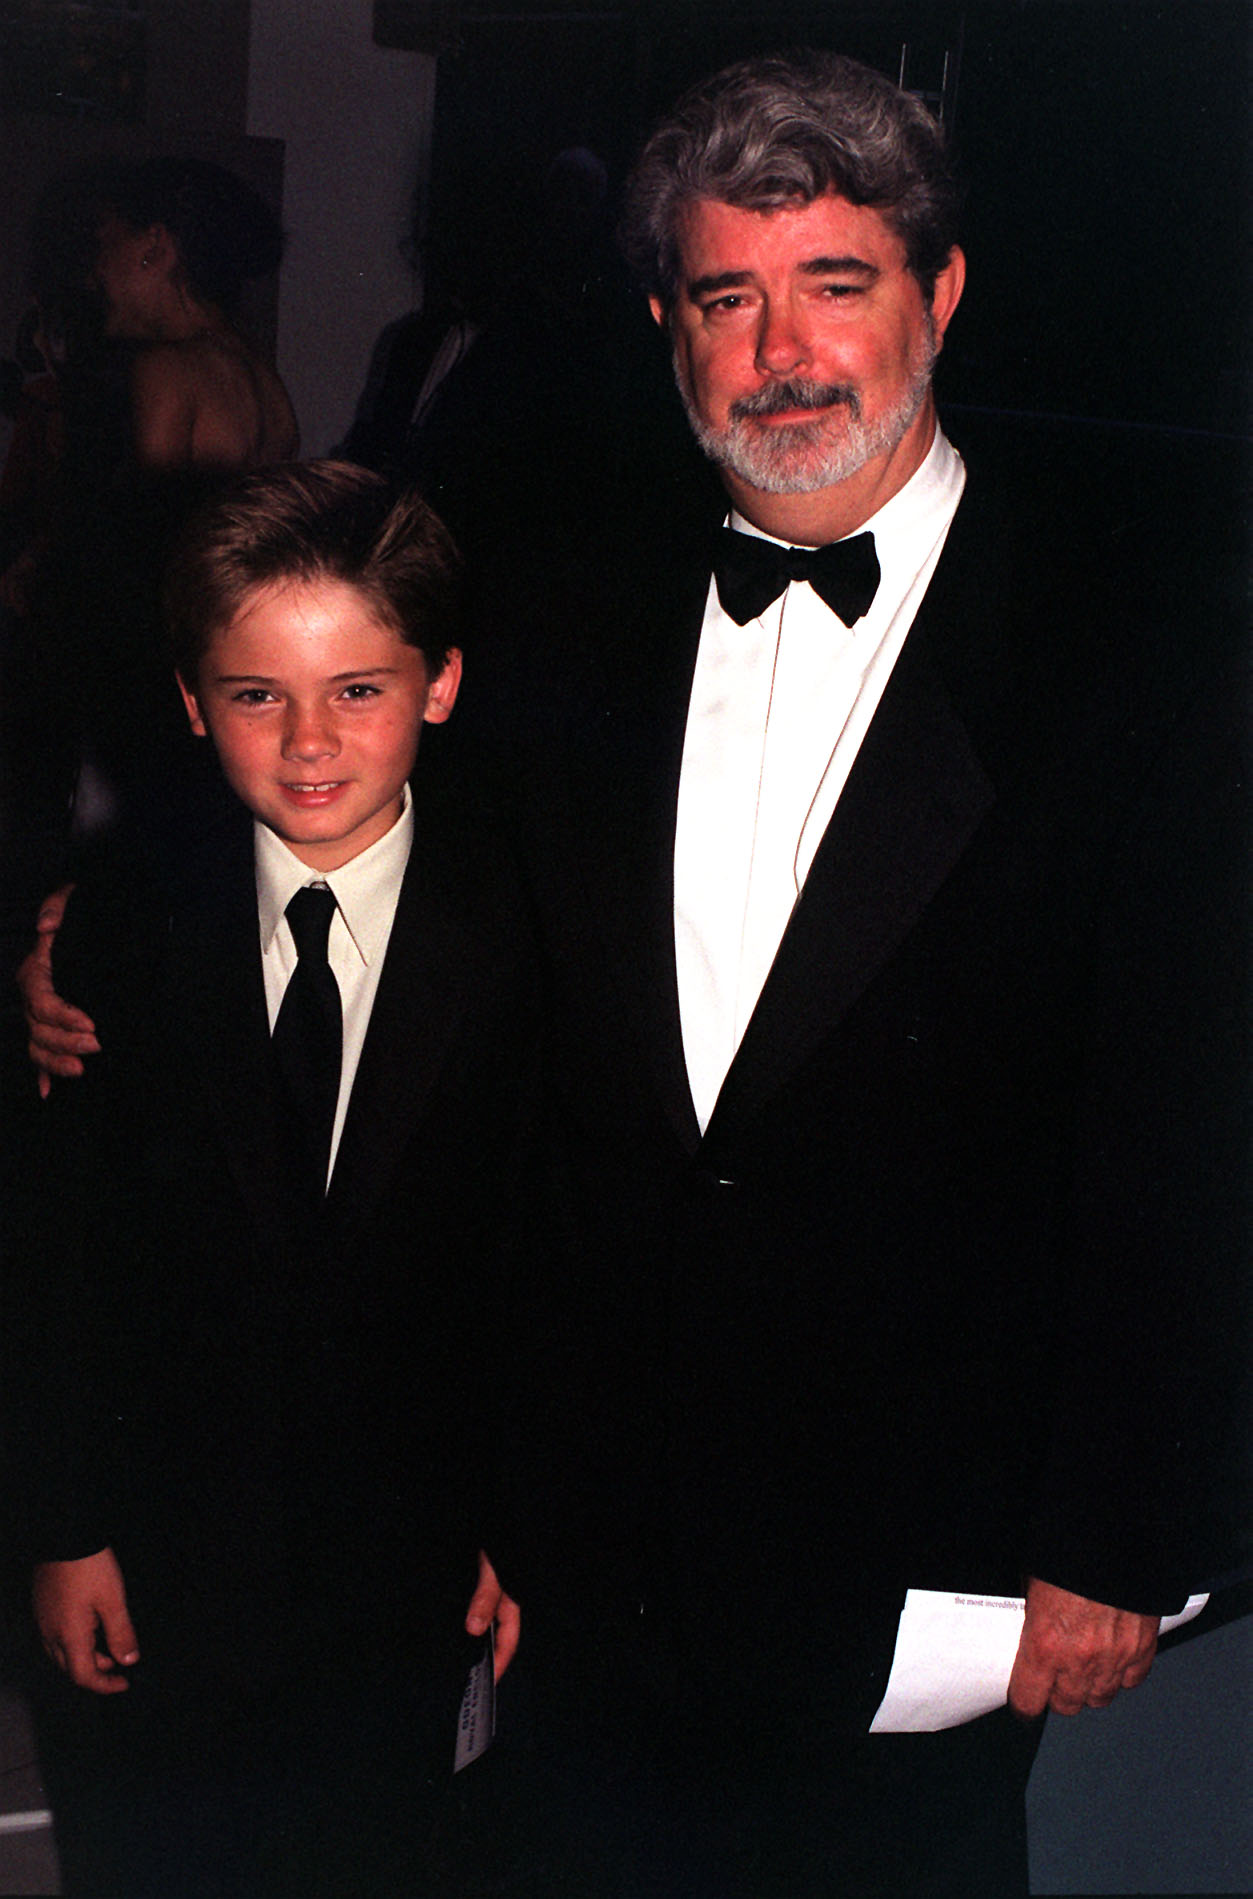 Jake Lloyd with director George Lucas on July 14, 1999 | Source: Getty images